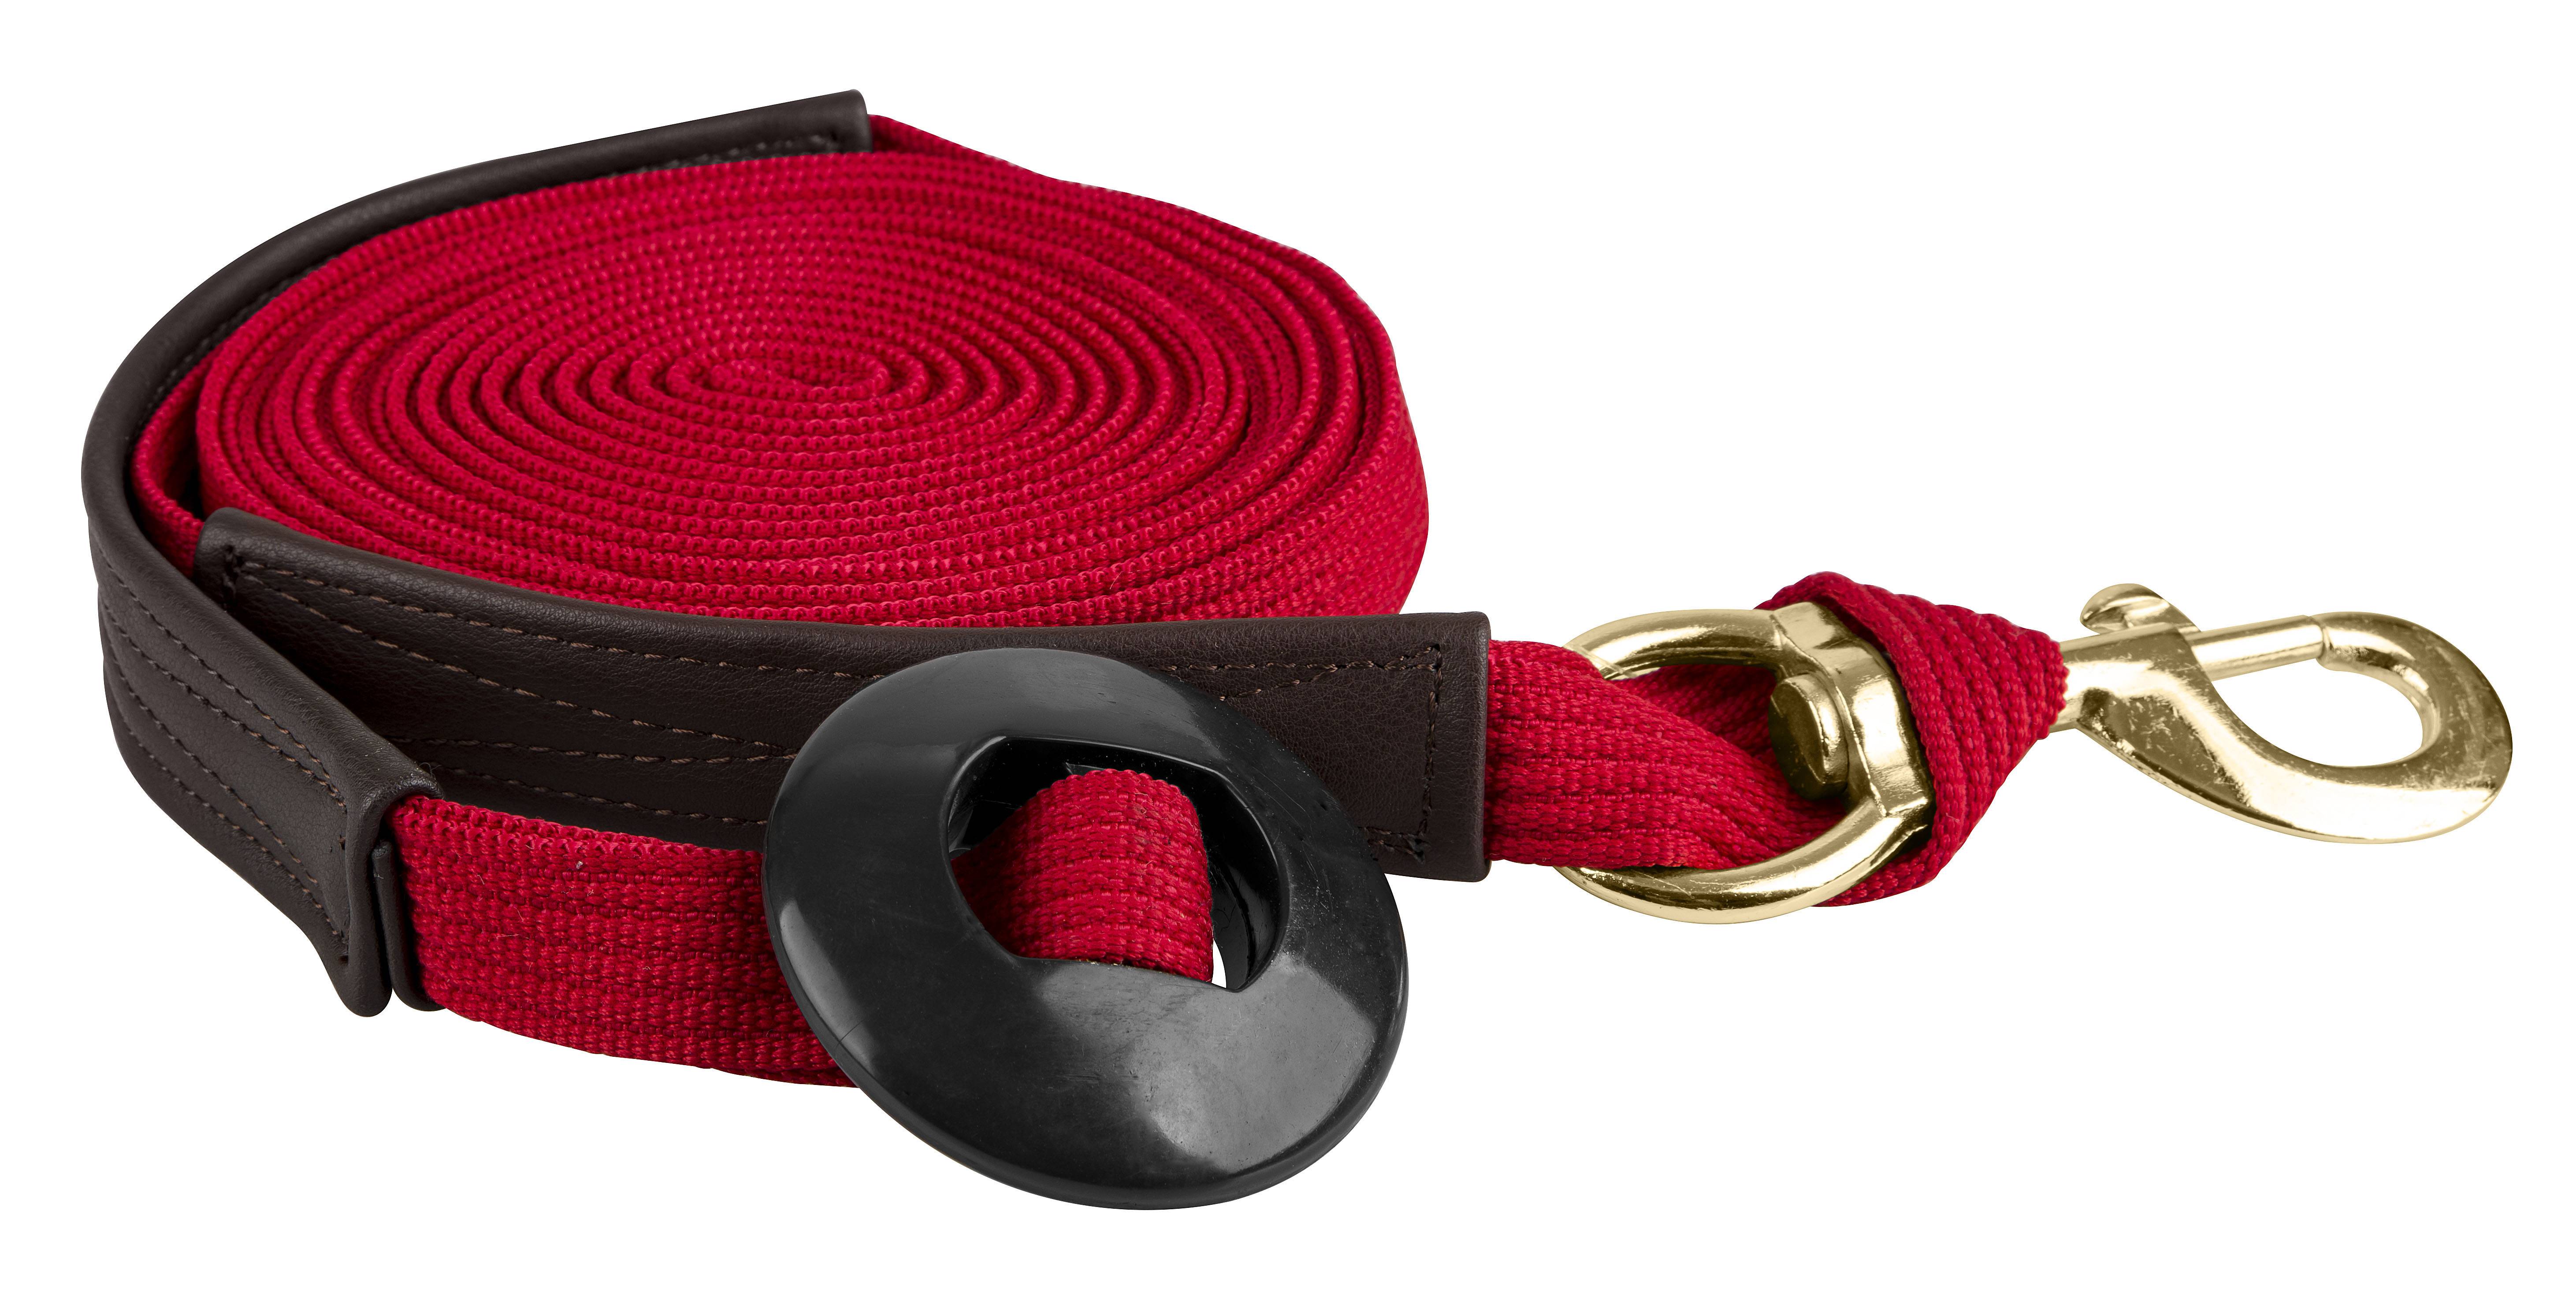 TH-CB-LLJS90-RED Gatsby Cotton Lunge Line with Rubber Donut and Sna sku TH-CB-LLJS90-RED